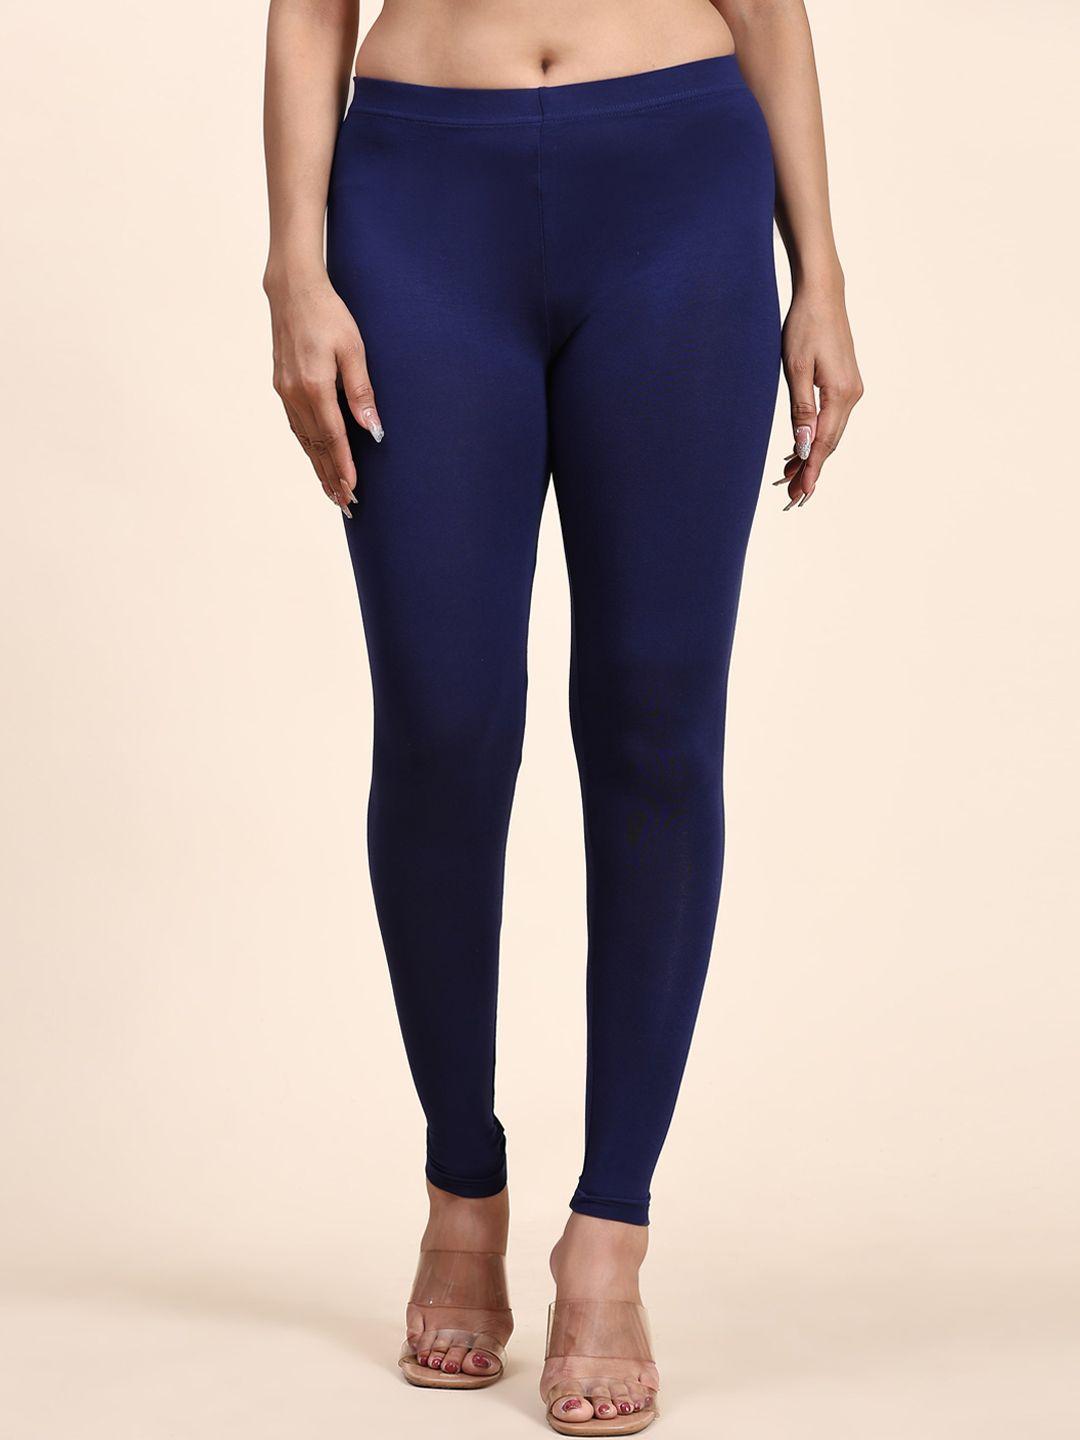 outflits skinny fit ankle-length leggings